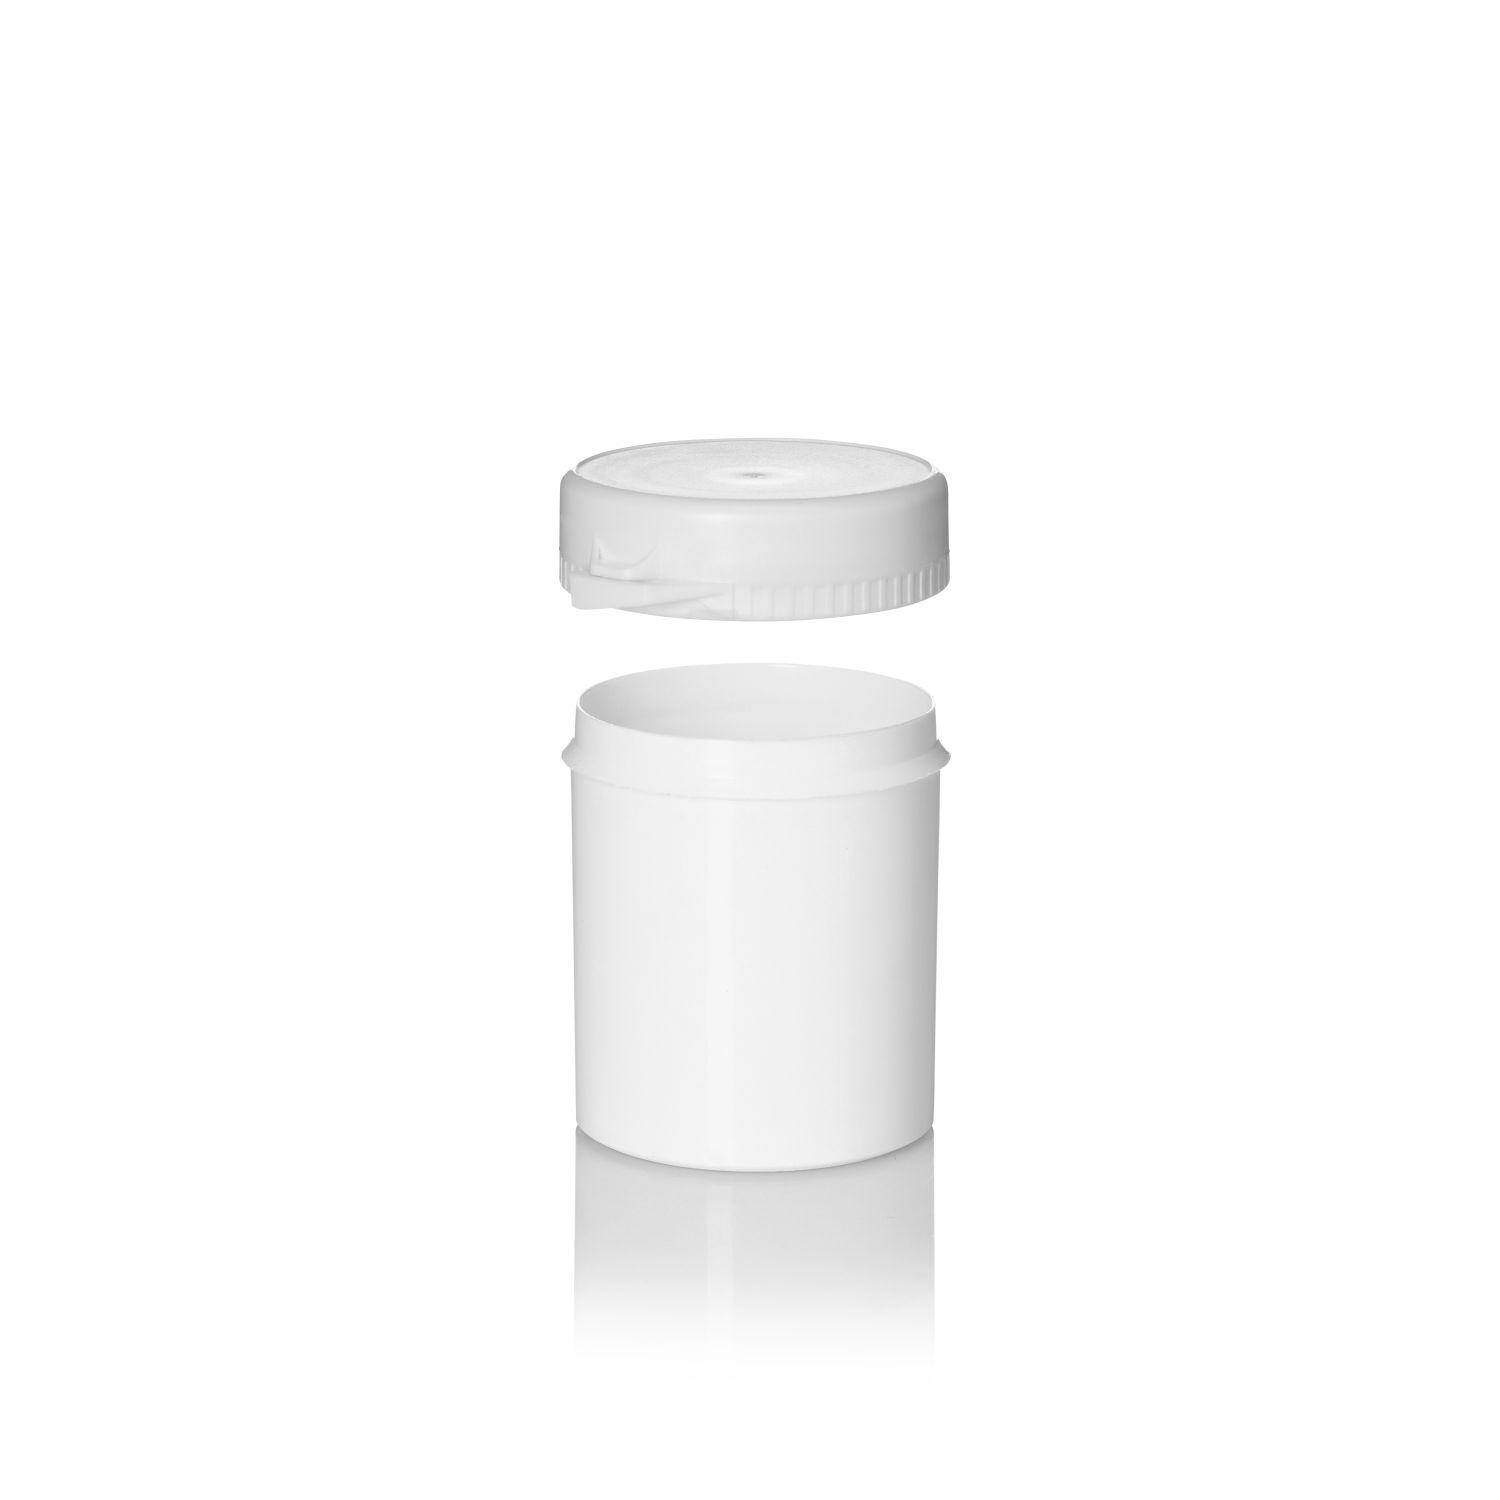 Stockists Of 100ml White PP Tamper Evident Snapsecure Jar